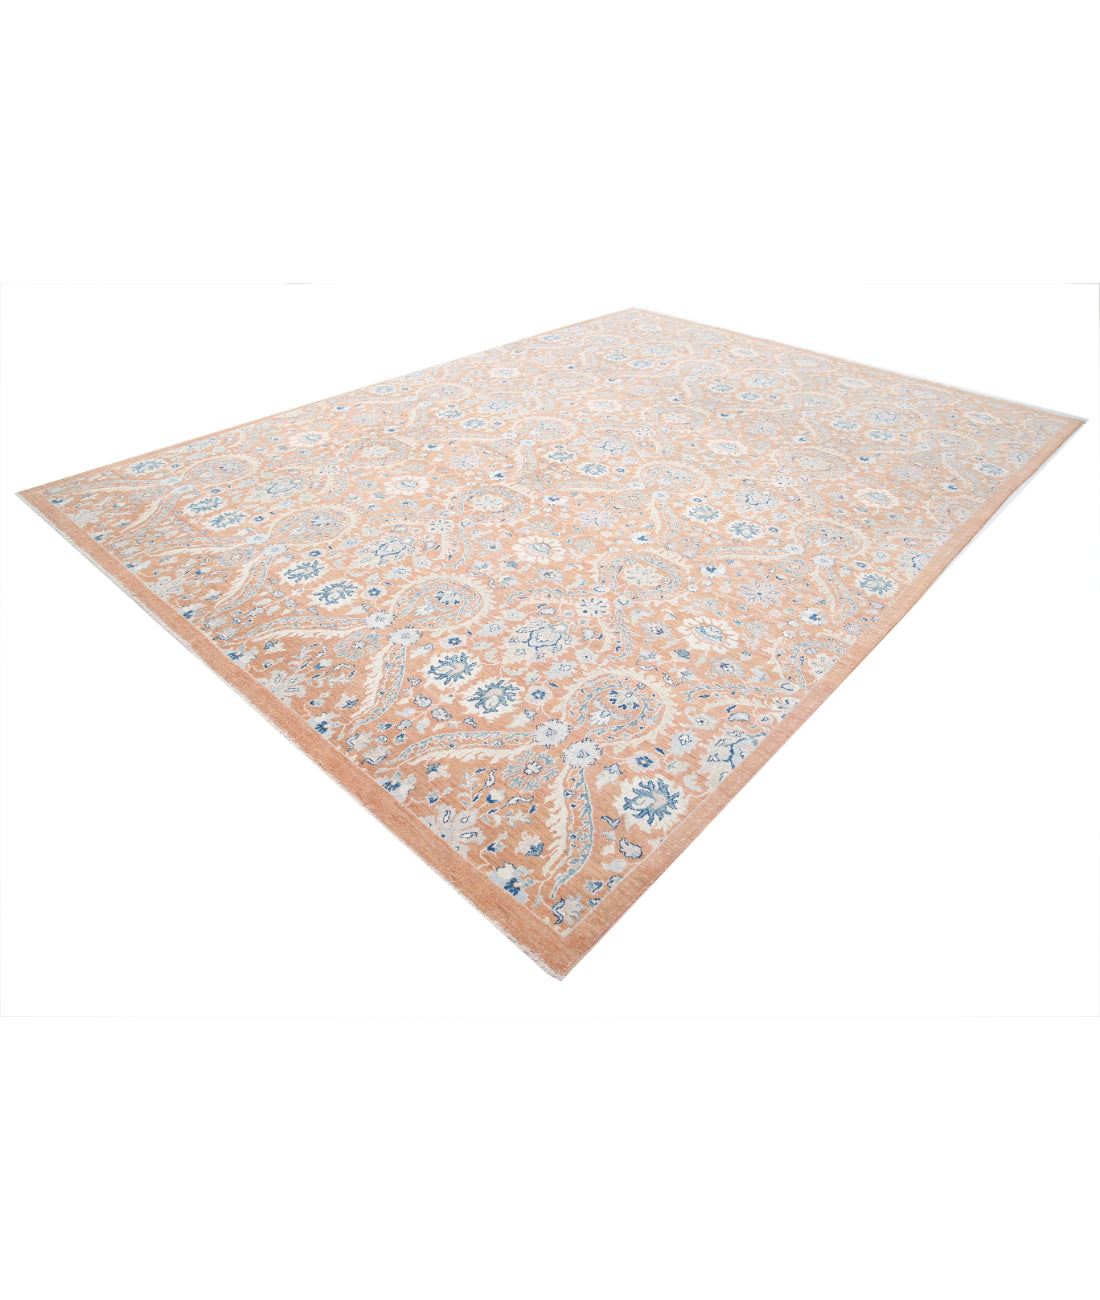 Hand Knotted Art & Craft Wool Rug - 9'10'' x 13'6'' 9'10'' x 13'6'' (295 X 405) / Brown / Blue